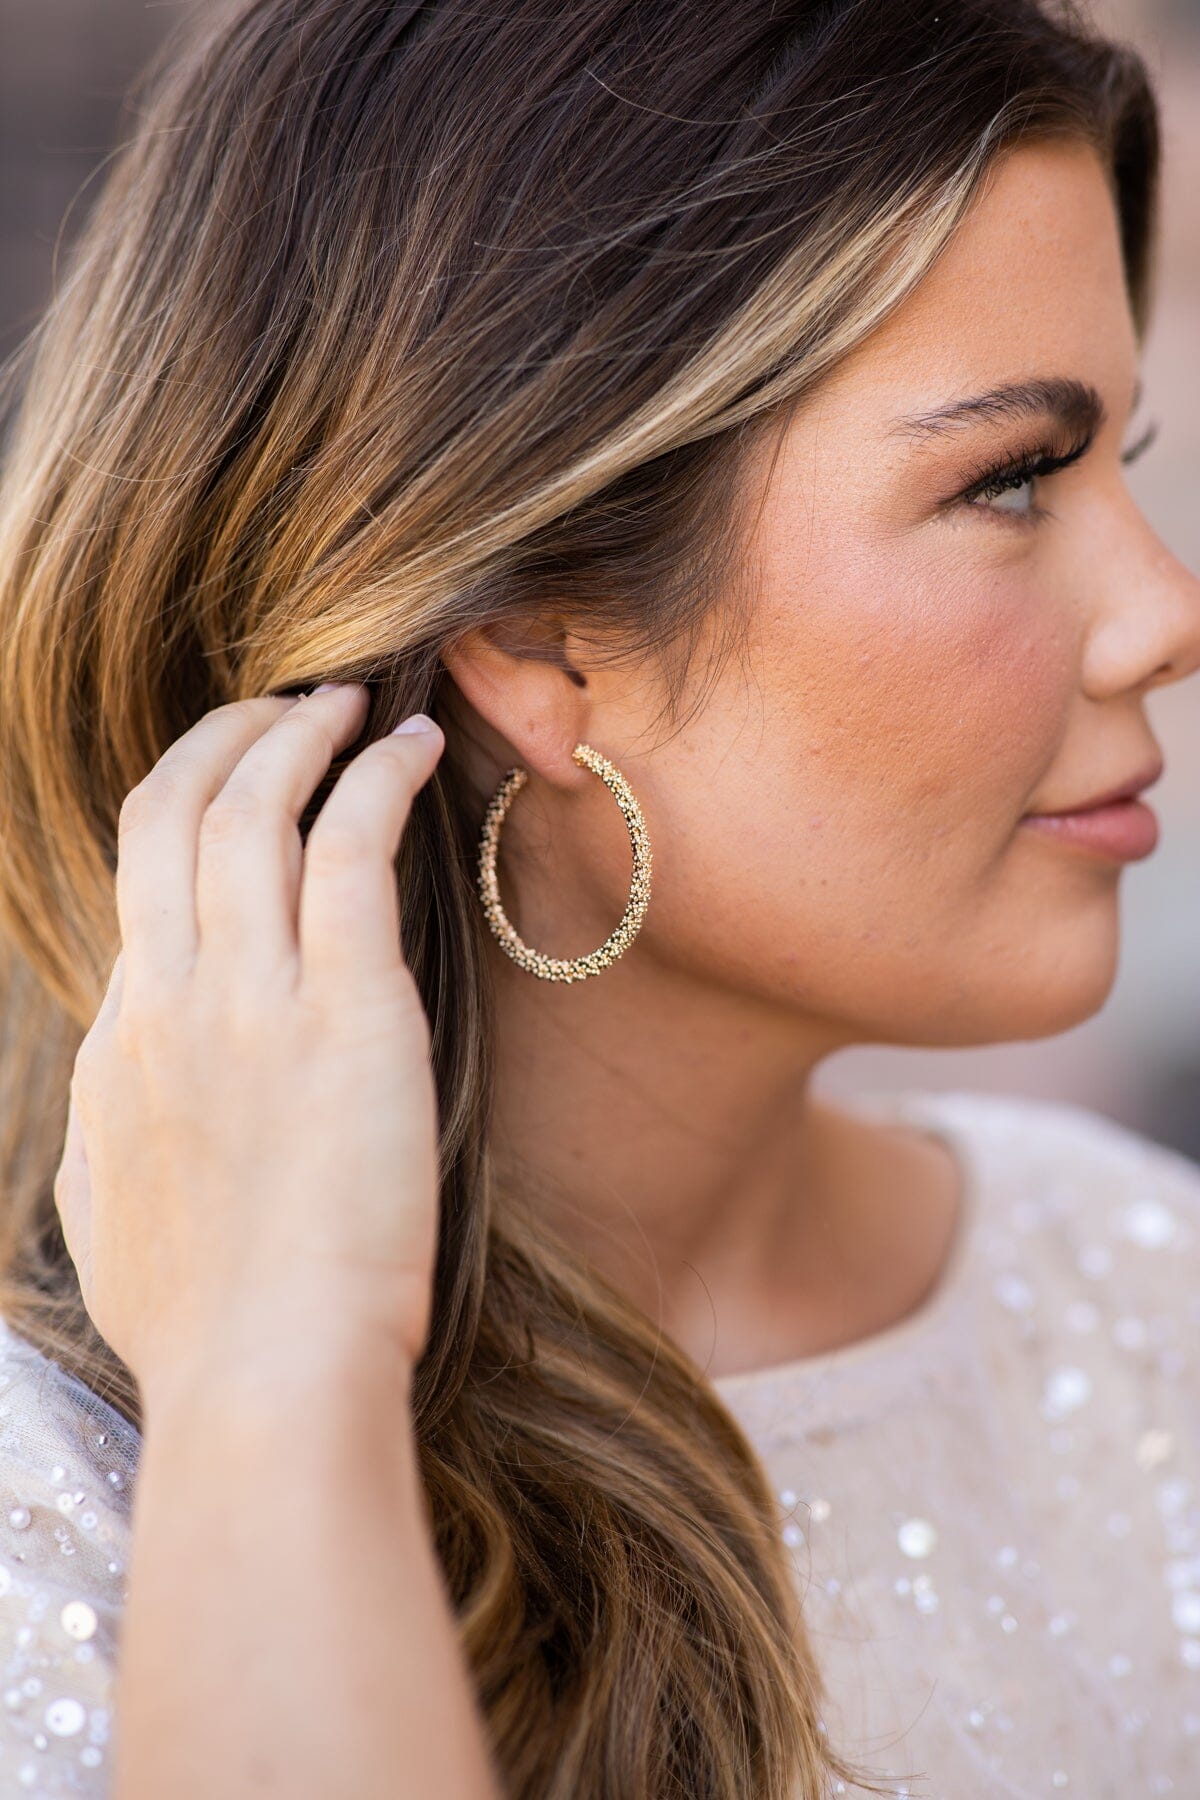 Gold Hoop Earrings With Texture - Filly Flair